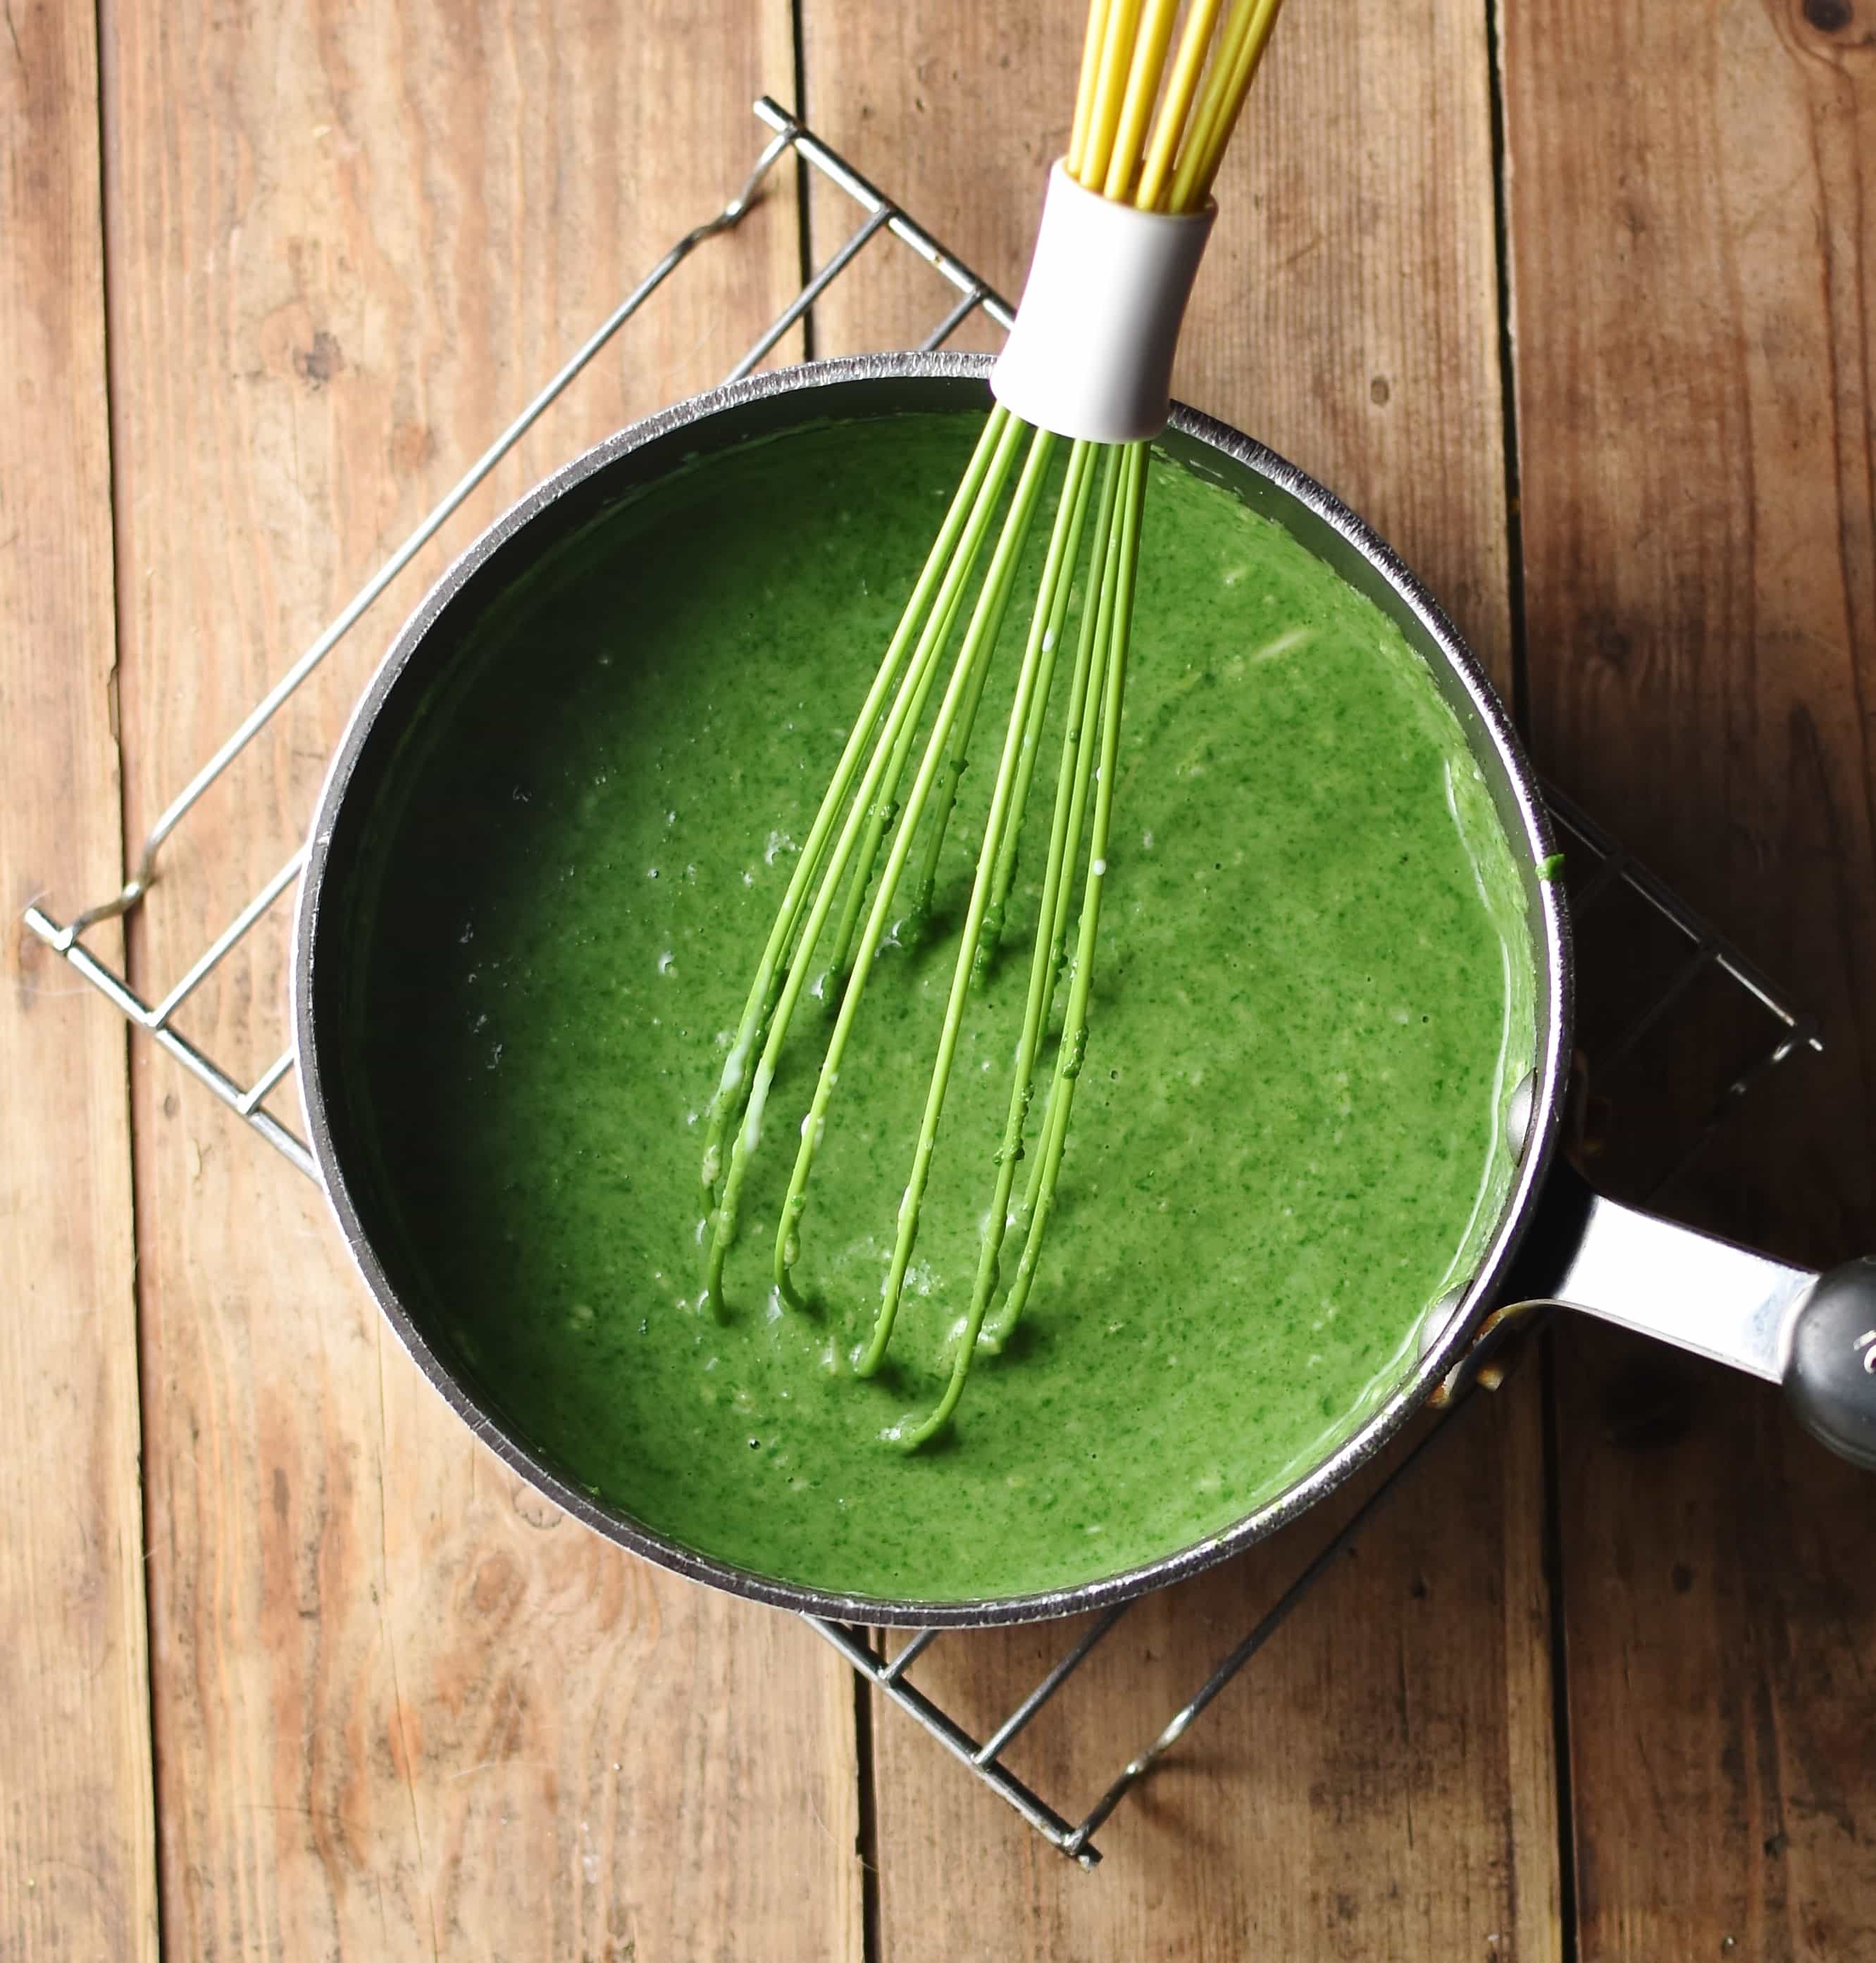 Top down view of spinach sauce inside large pot with green whisk.